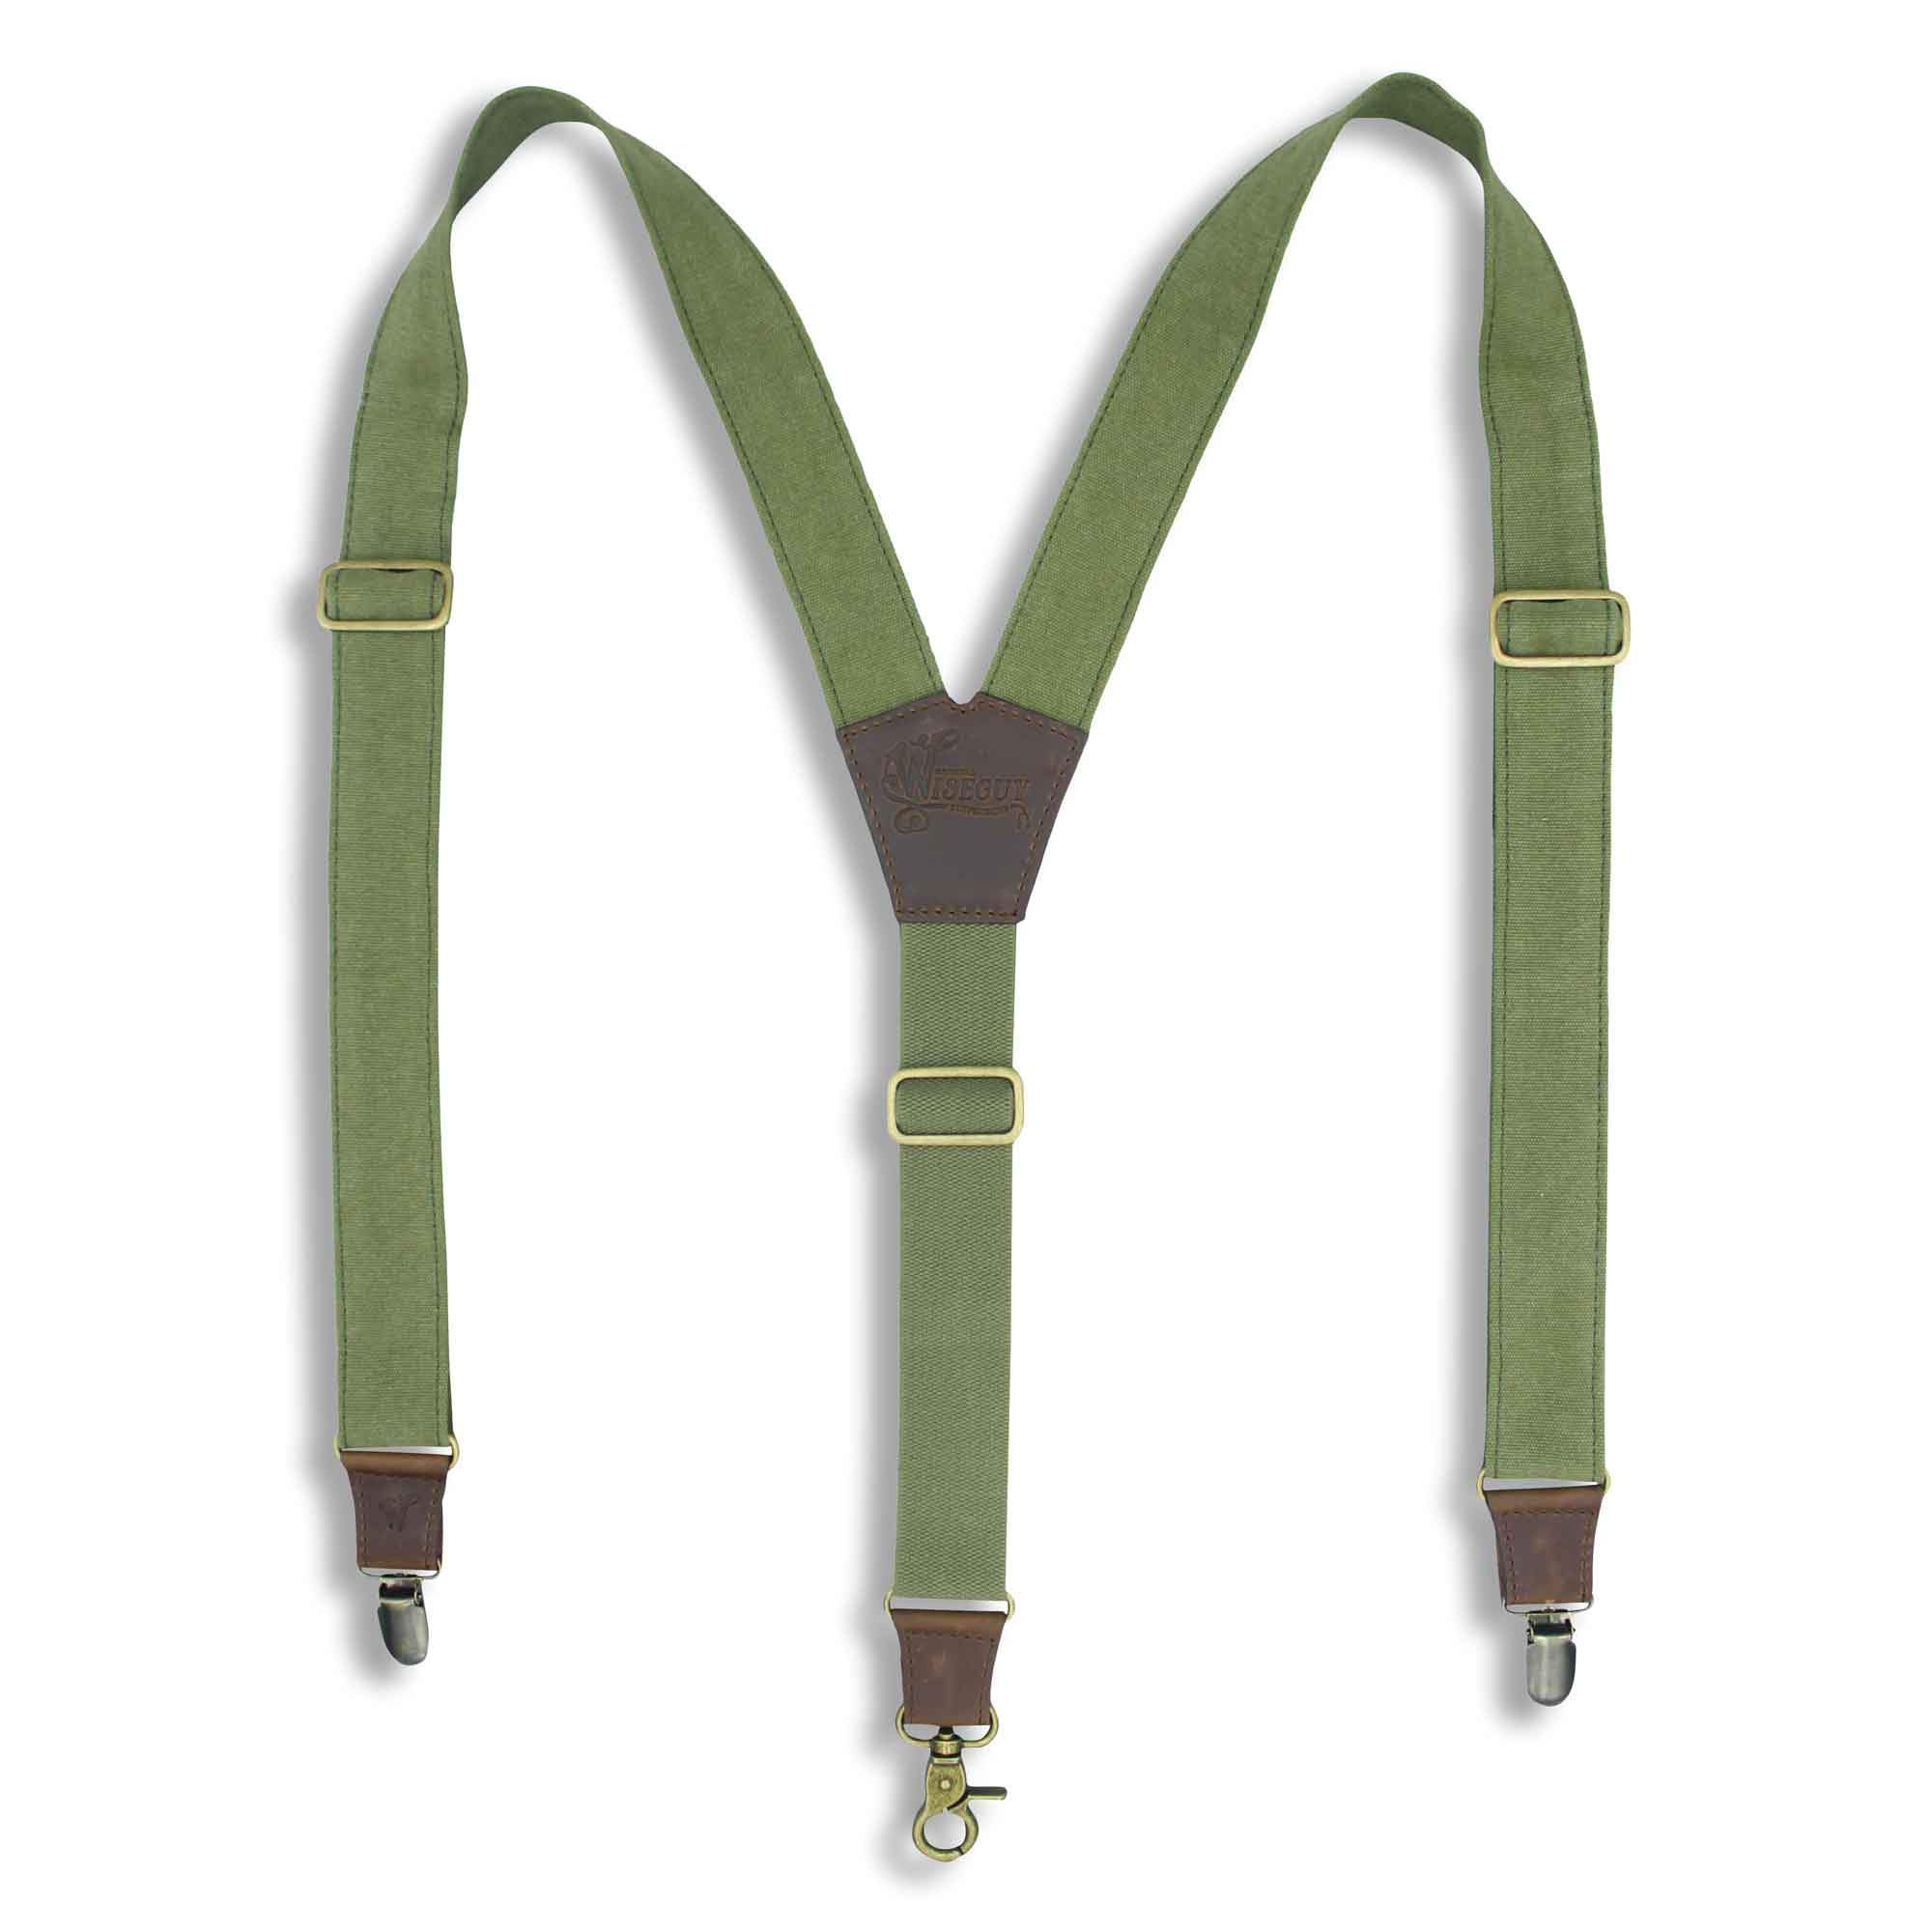 Duck Canvas Army Green Suspenders with Green Elastic back strap 1.3" - Wiseguy Suspenders